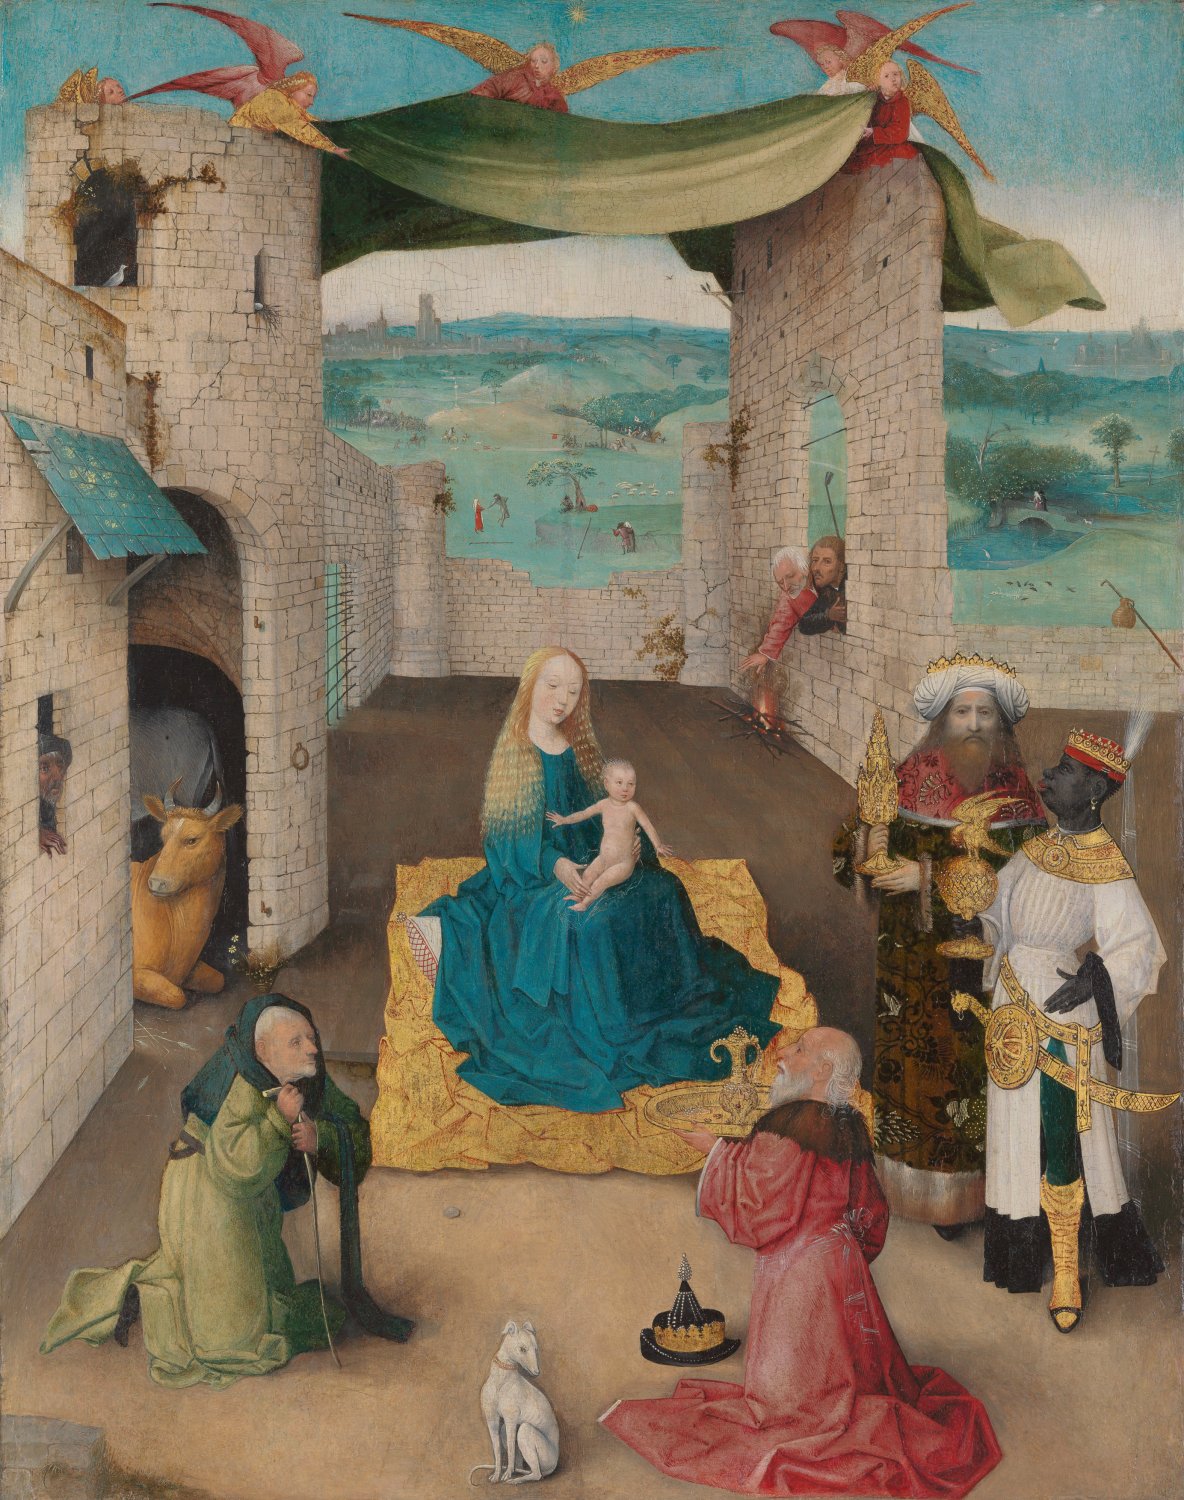 Menotti's opera was inspired by The Adoration of the Magi, by Hieronymus Bosch